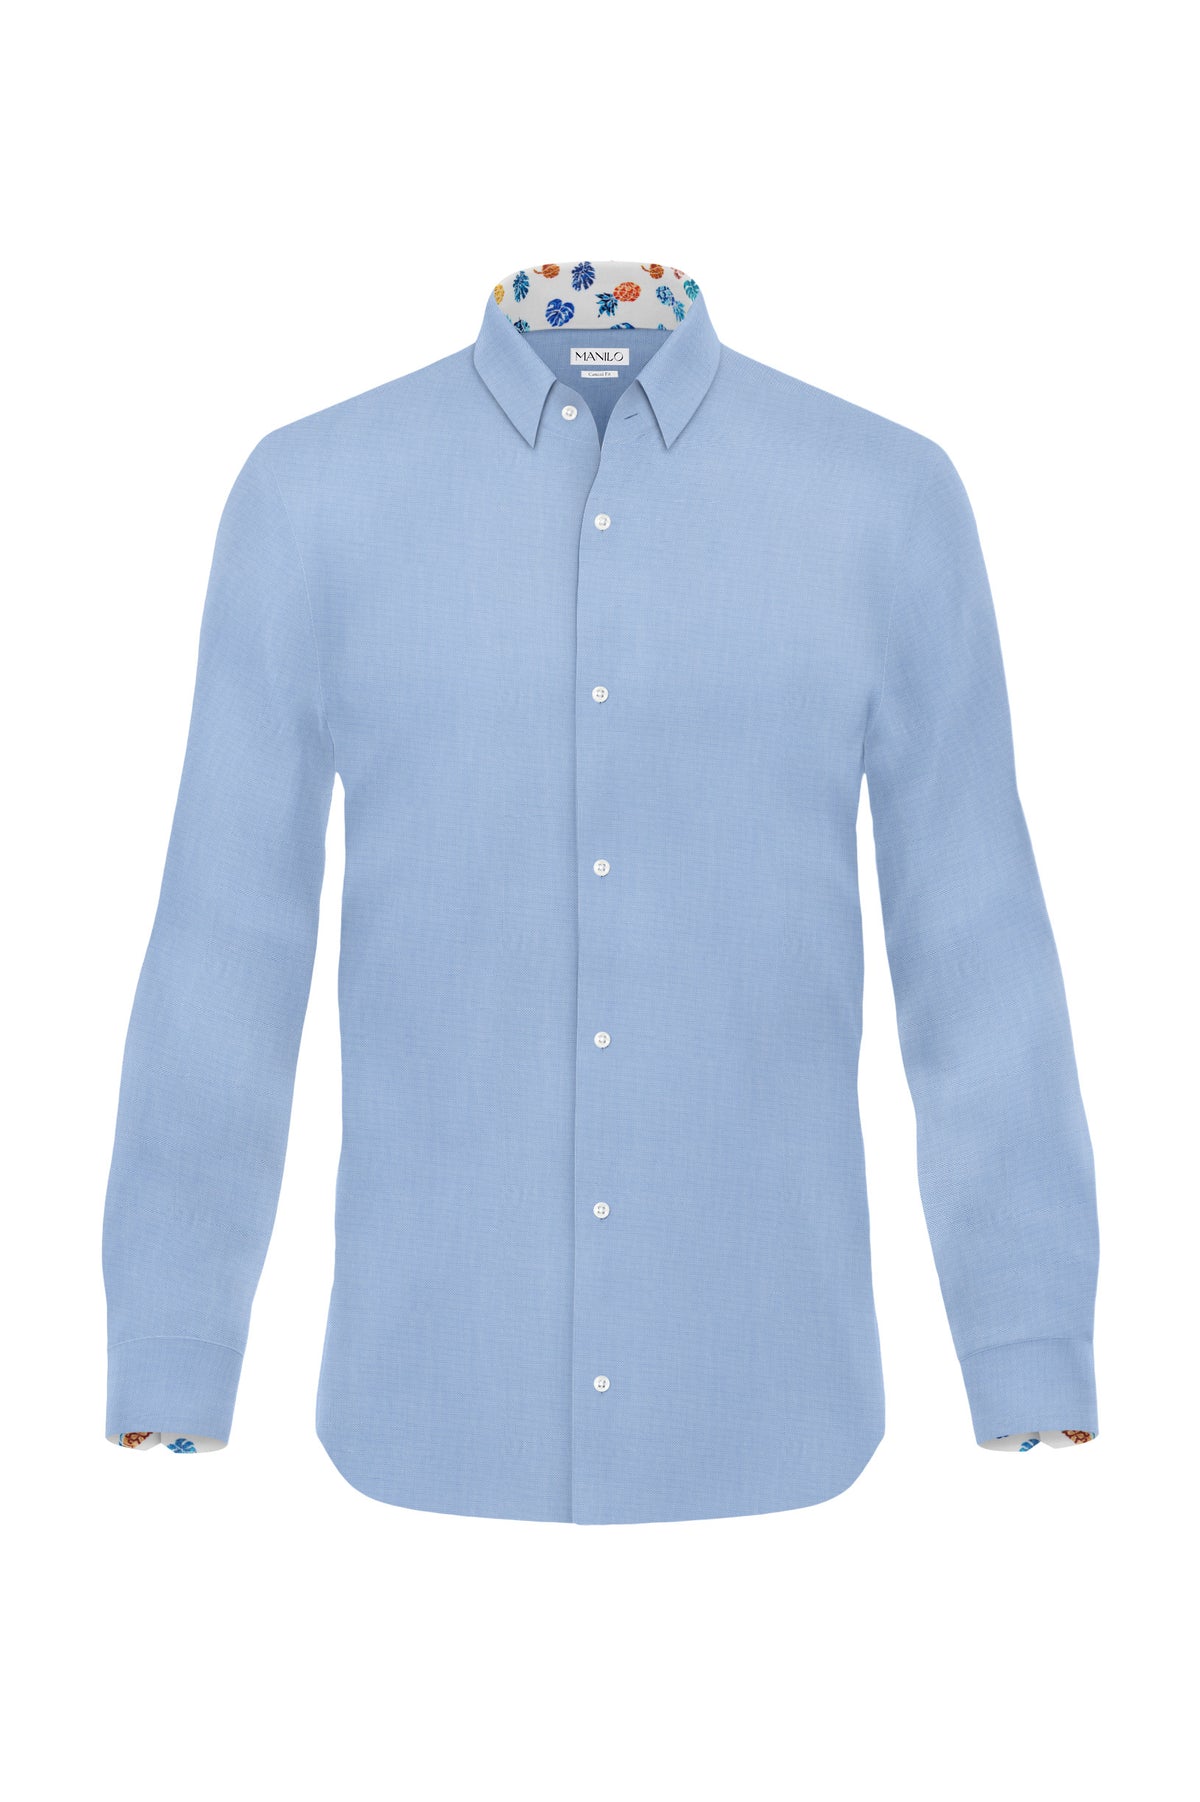 Casual shirt with summery print pattern in collar and cuff in light blue (item 2252-C)